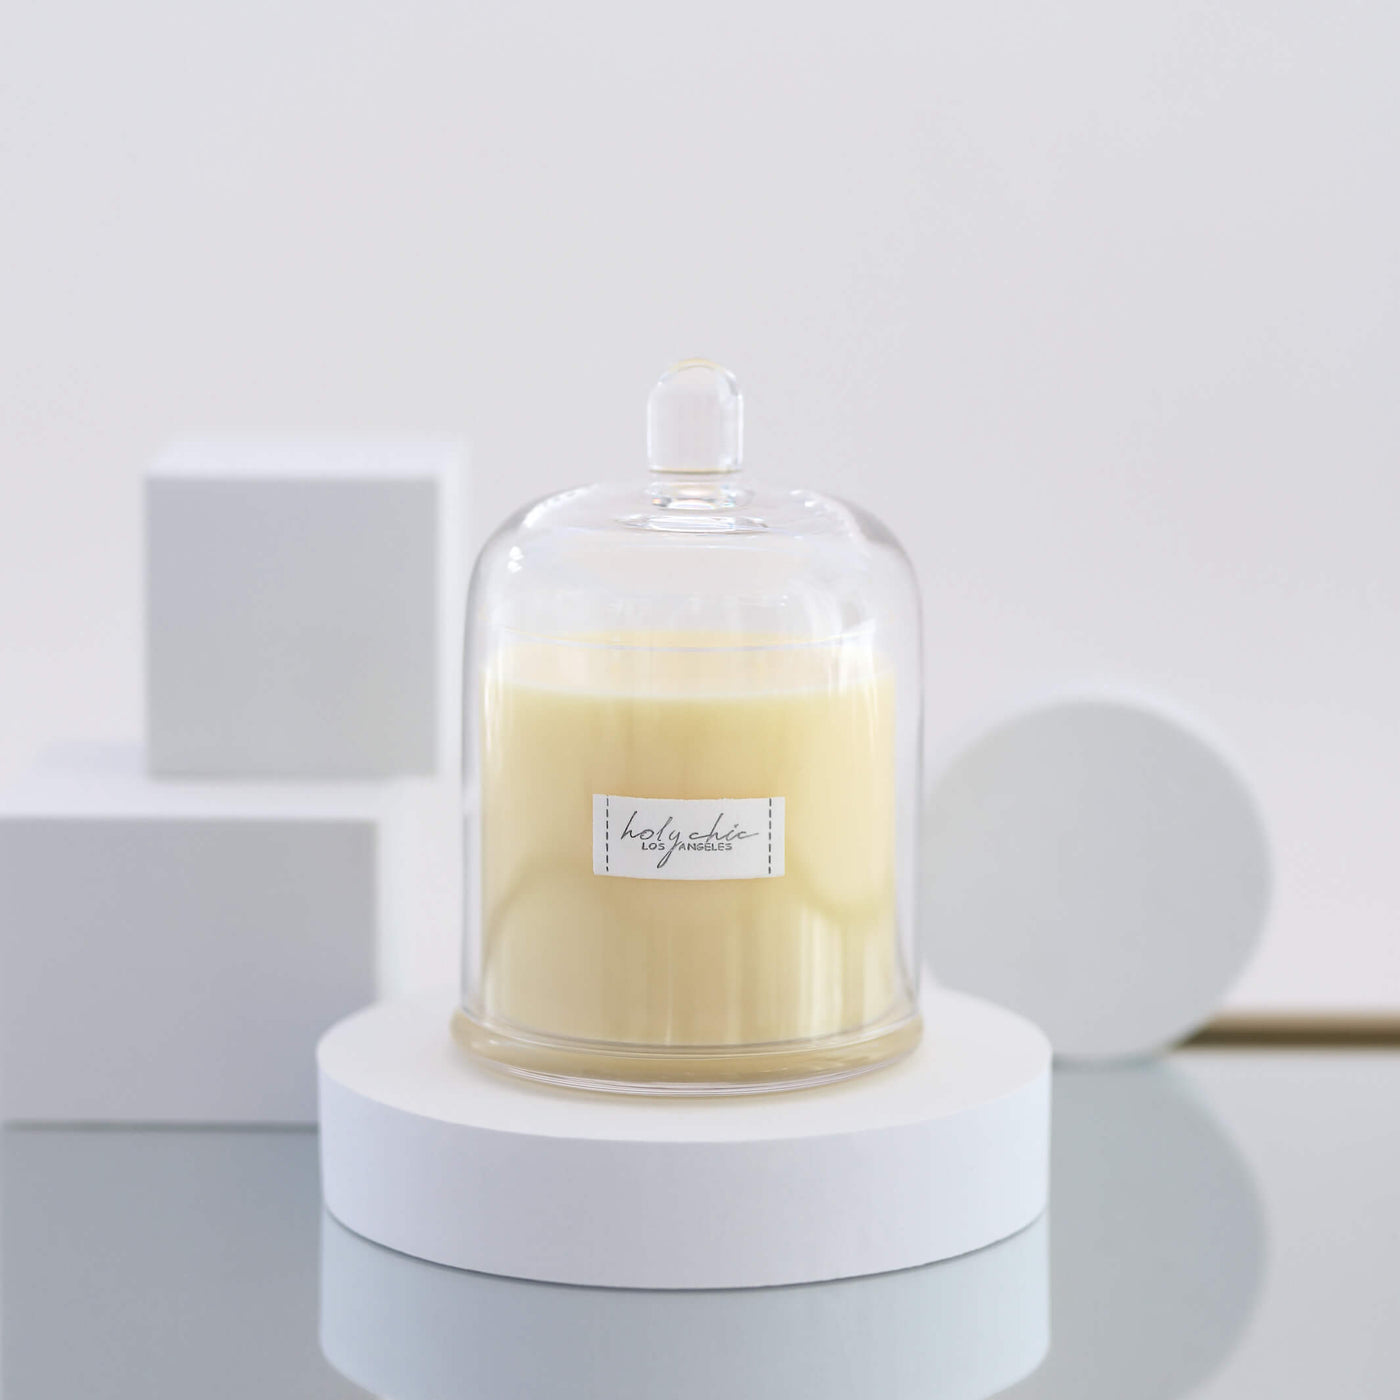 Scented candle in a light yellow color